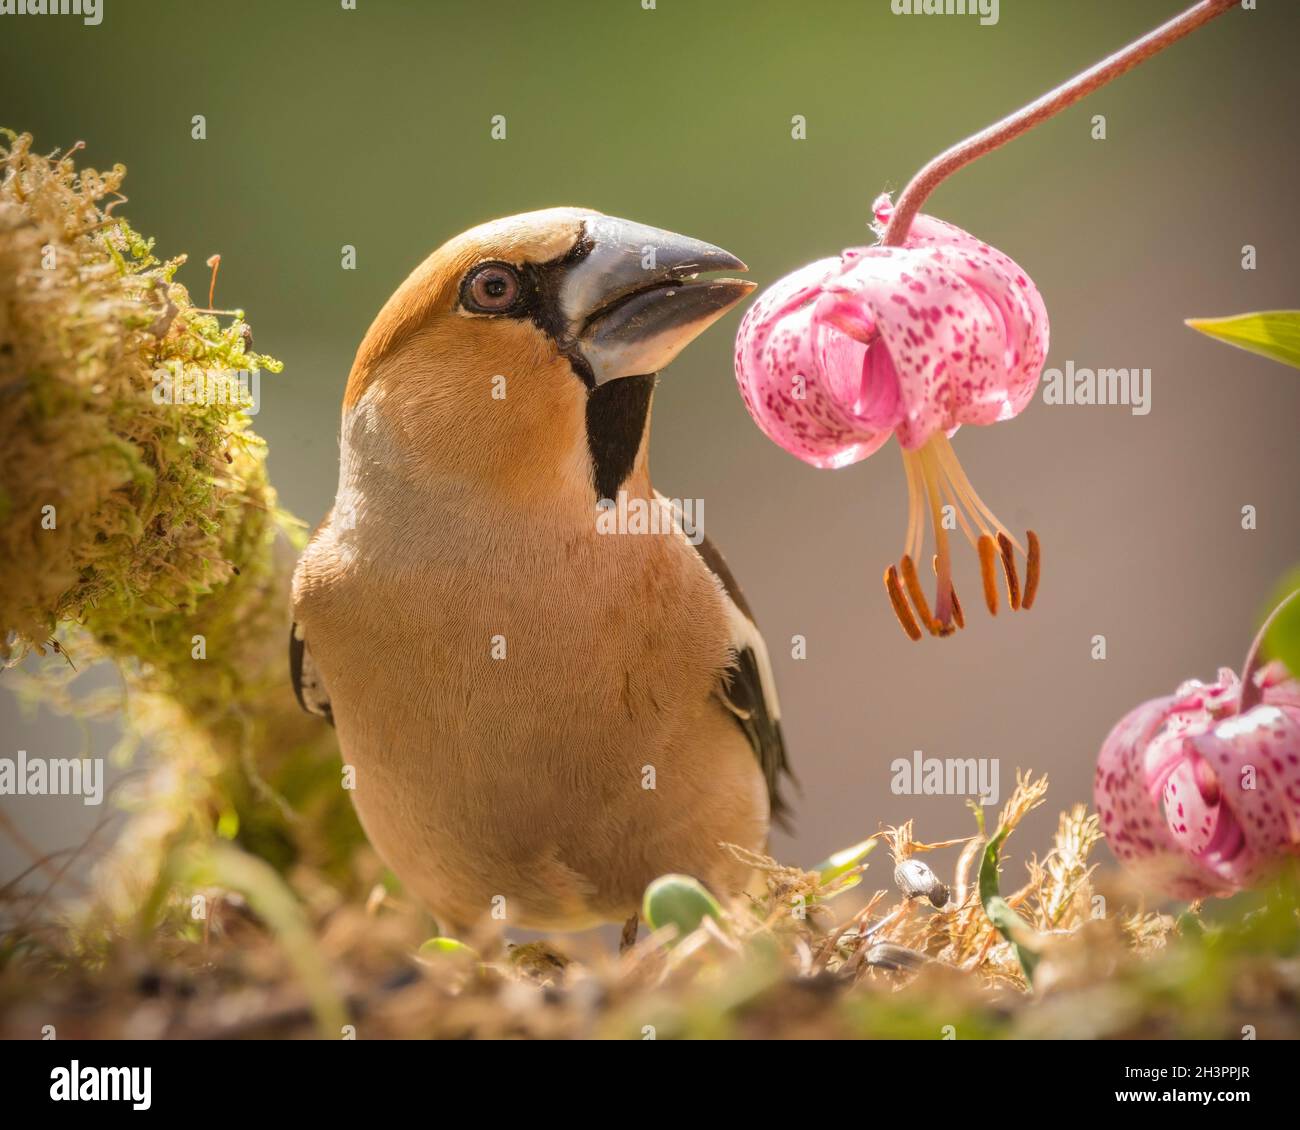 hawfinch standing on moss looking out over a lily Stock Photo